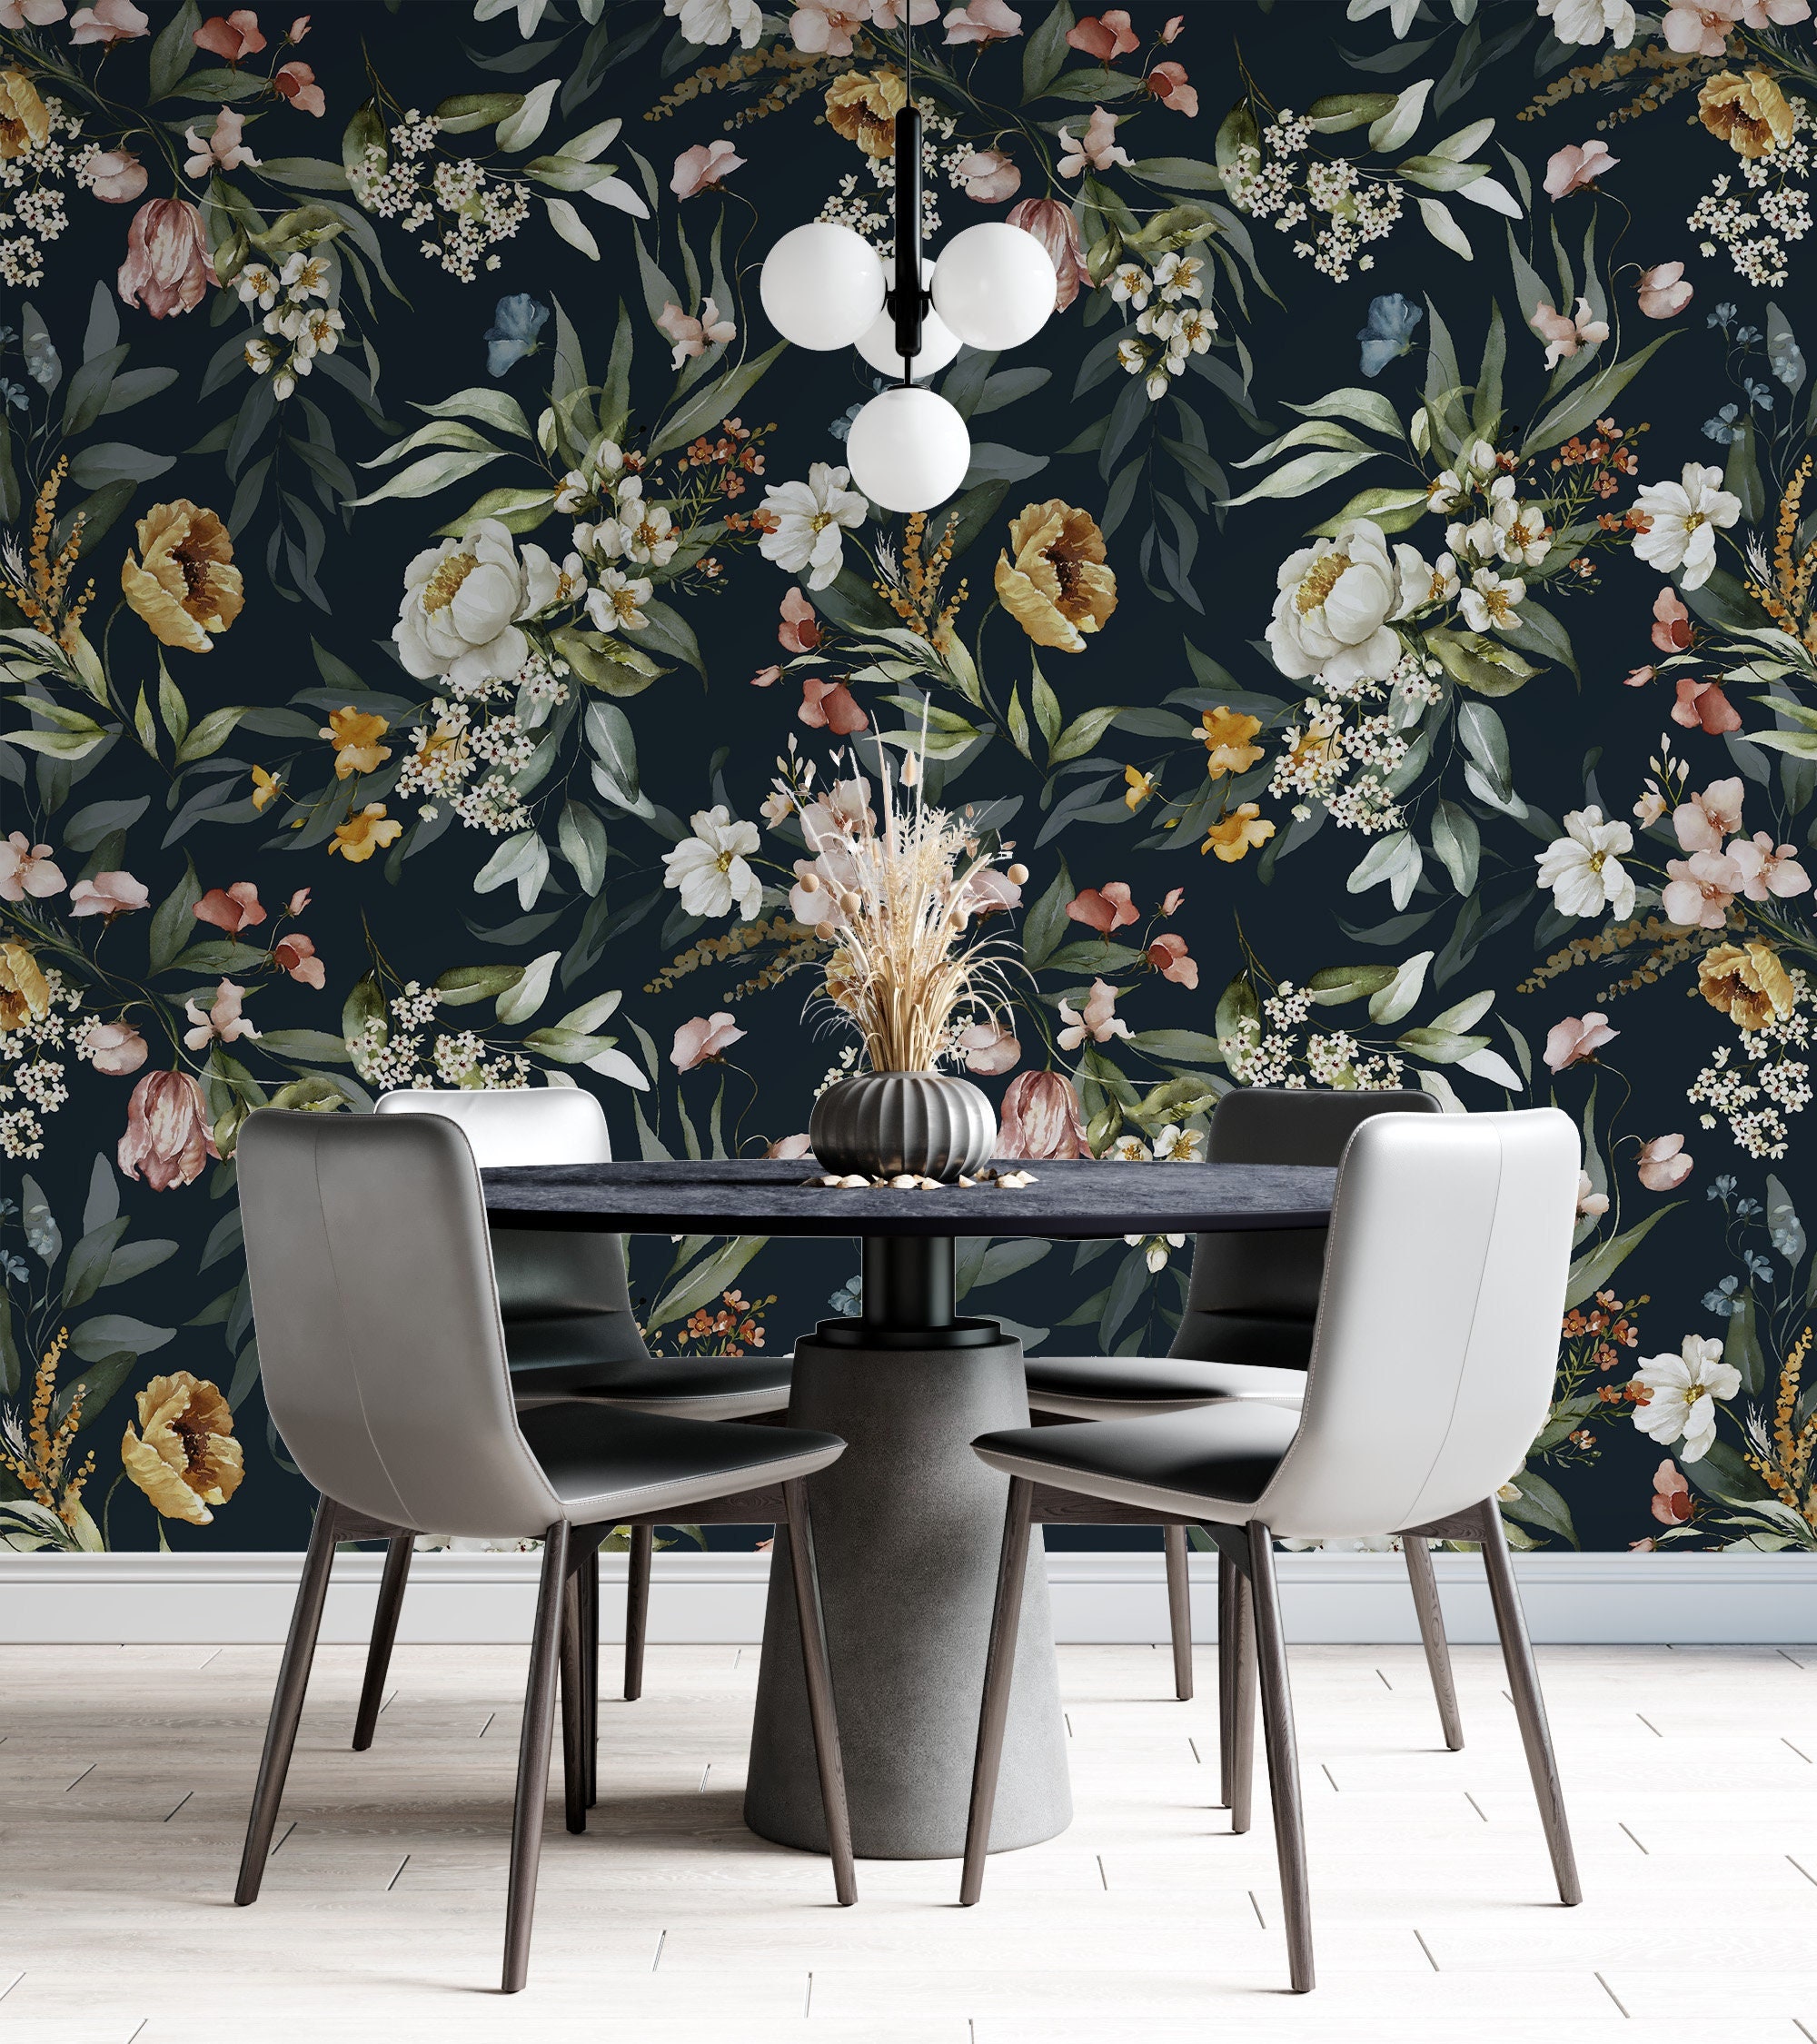 10x7 ft black floral bedroom wallpaper plant WALL MURAL botanical +FREE  ADHESIVE